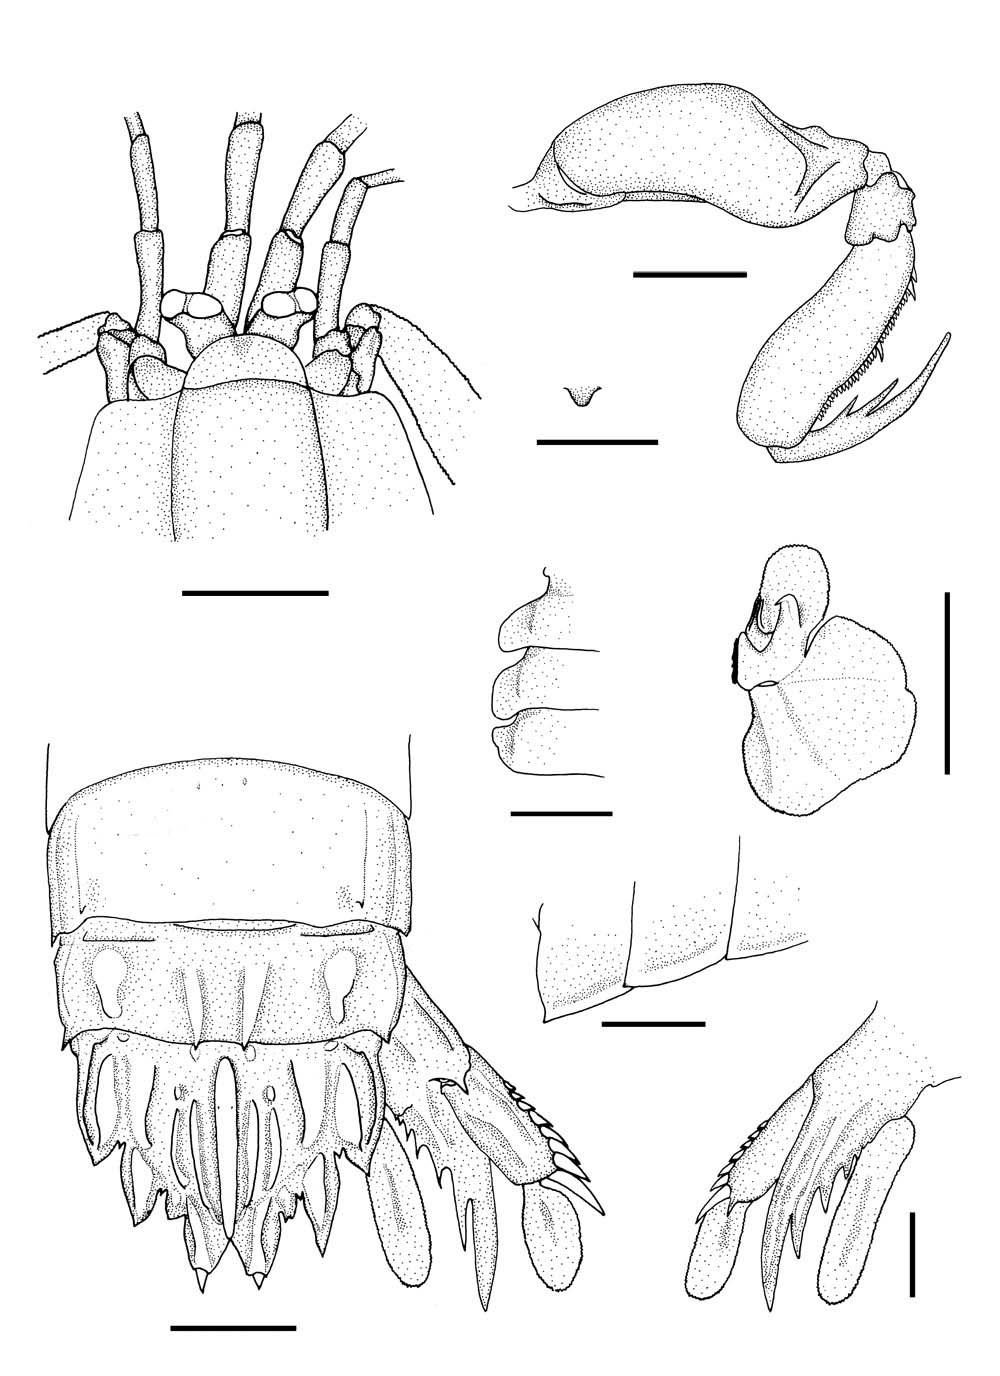 Faughnia formosae Manning and Chan, 1997, male. A, Anterior cephalon; B, Raptorial claw; C, Sternal keel of eighth thoracic somite, right lateral; D, Lateral processes of sixth to eighth thoracic somites; E, Endopod of first male pleopod; F, Fifth to sixth abdominal somites, telson, and uropod; G, Posterolateral angles of fourth to sixth abdominal somites; H, Uropod, right ventral. Scale bars: A, B, D-H=10 mm, C=20 mm.